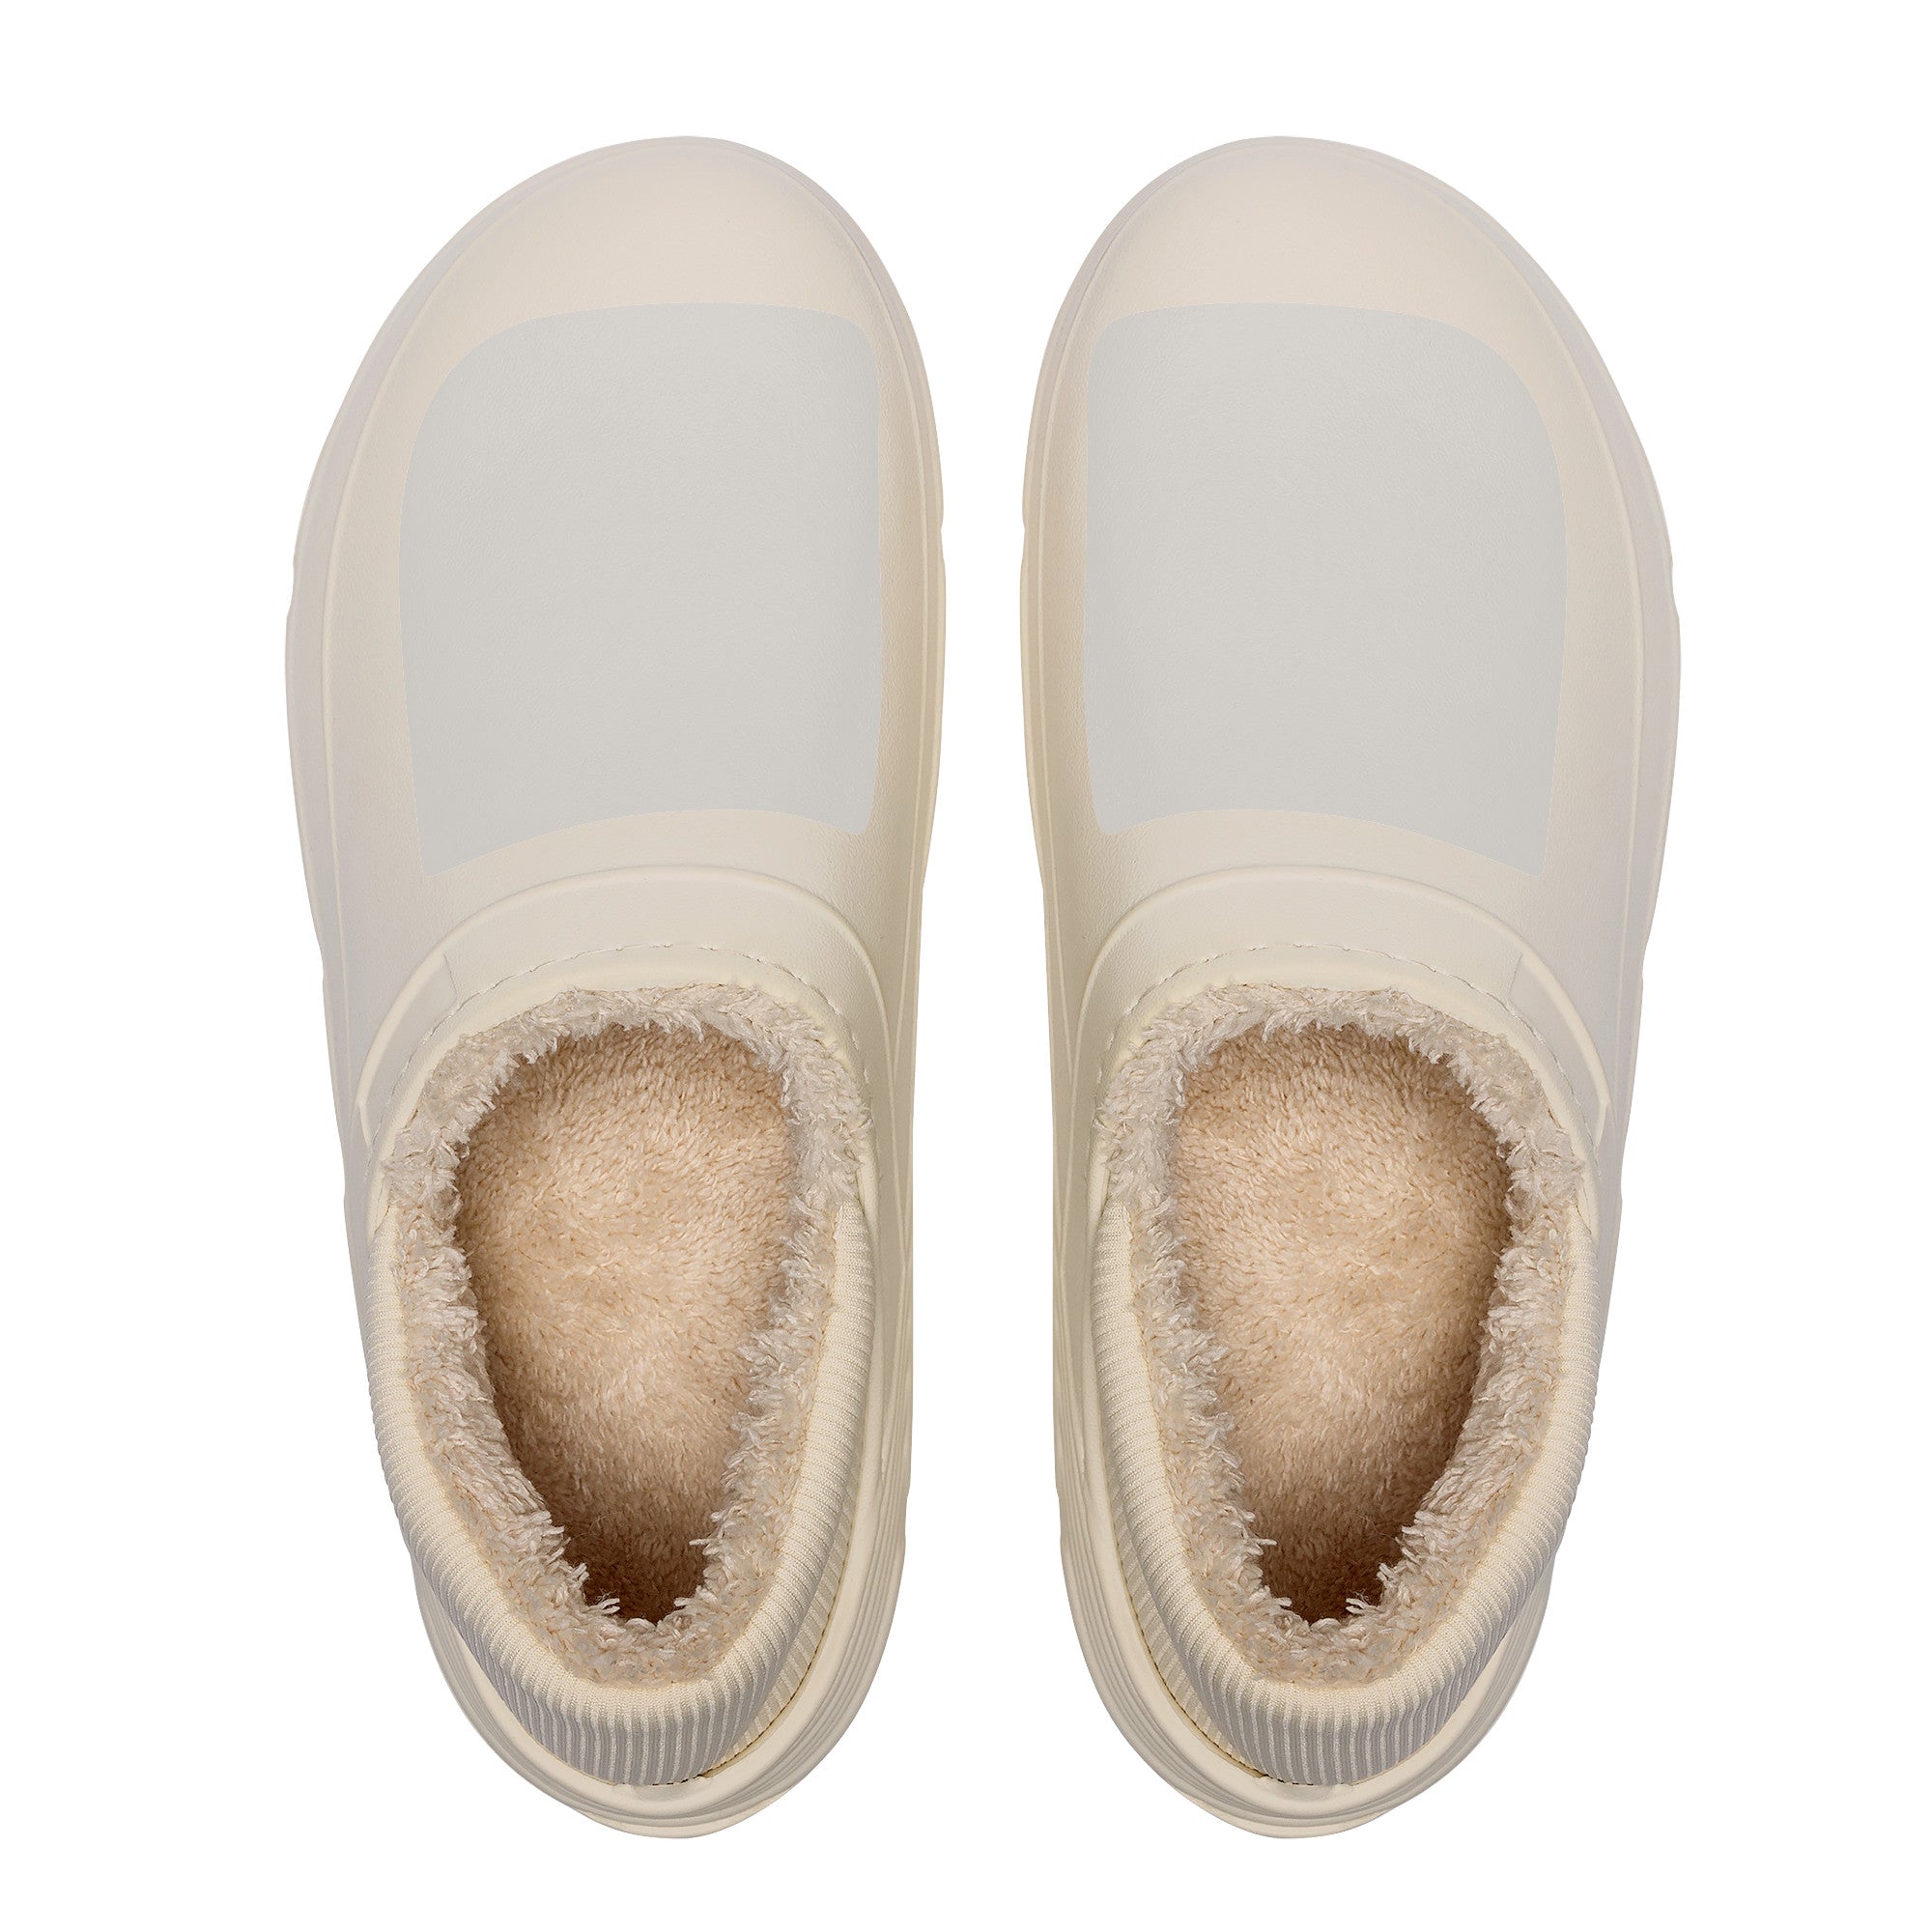 Customizable Warm Cotton Slippers, Sandals Customized